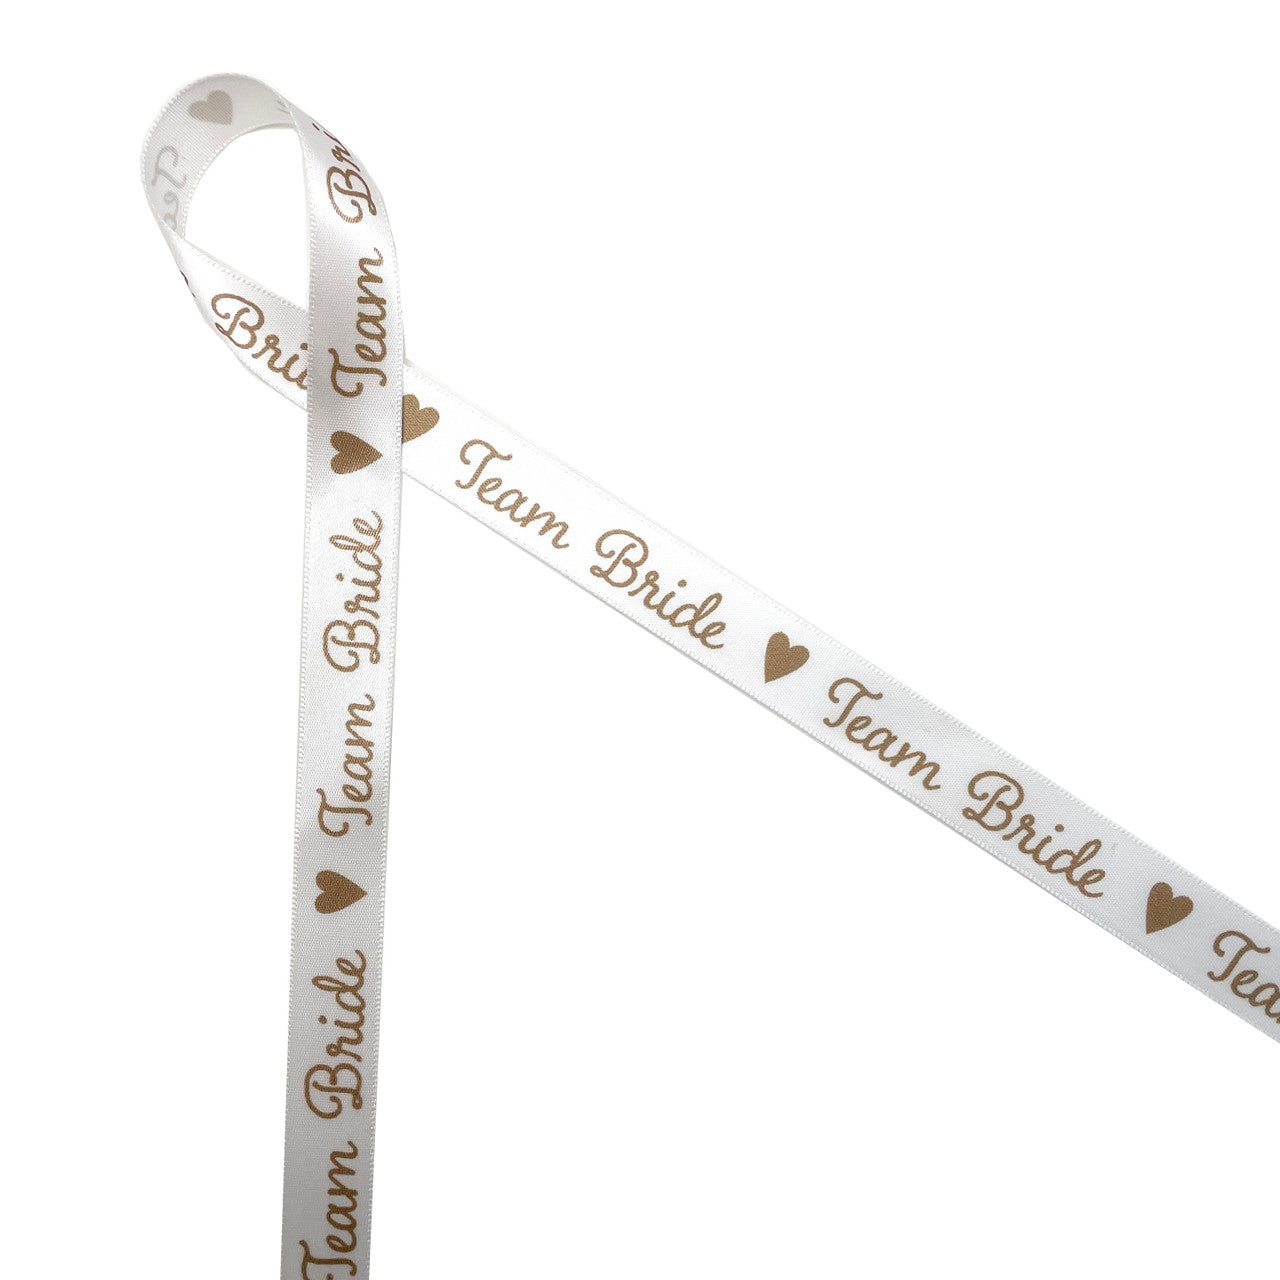 Our team bride ribbon printed on 5/8" white single face satin is the perfect addition to bridesmaids gifts, flower girl gifts, bridal luncheons and gifts. Be sure to have this special ribbon on had for all the events leading up to the big day! All our ribbon is designed and printed in the USA